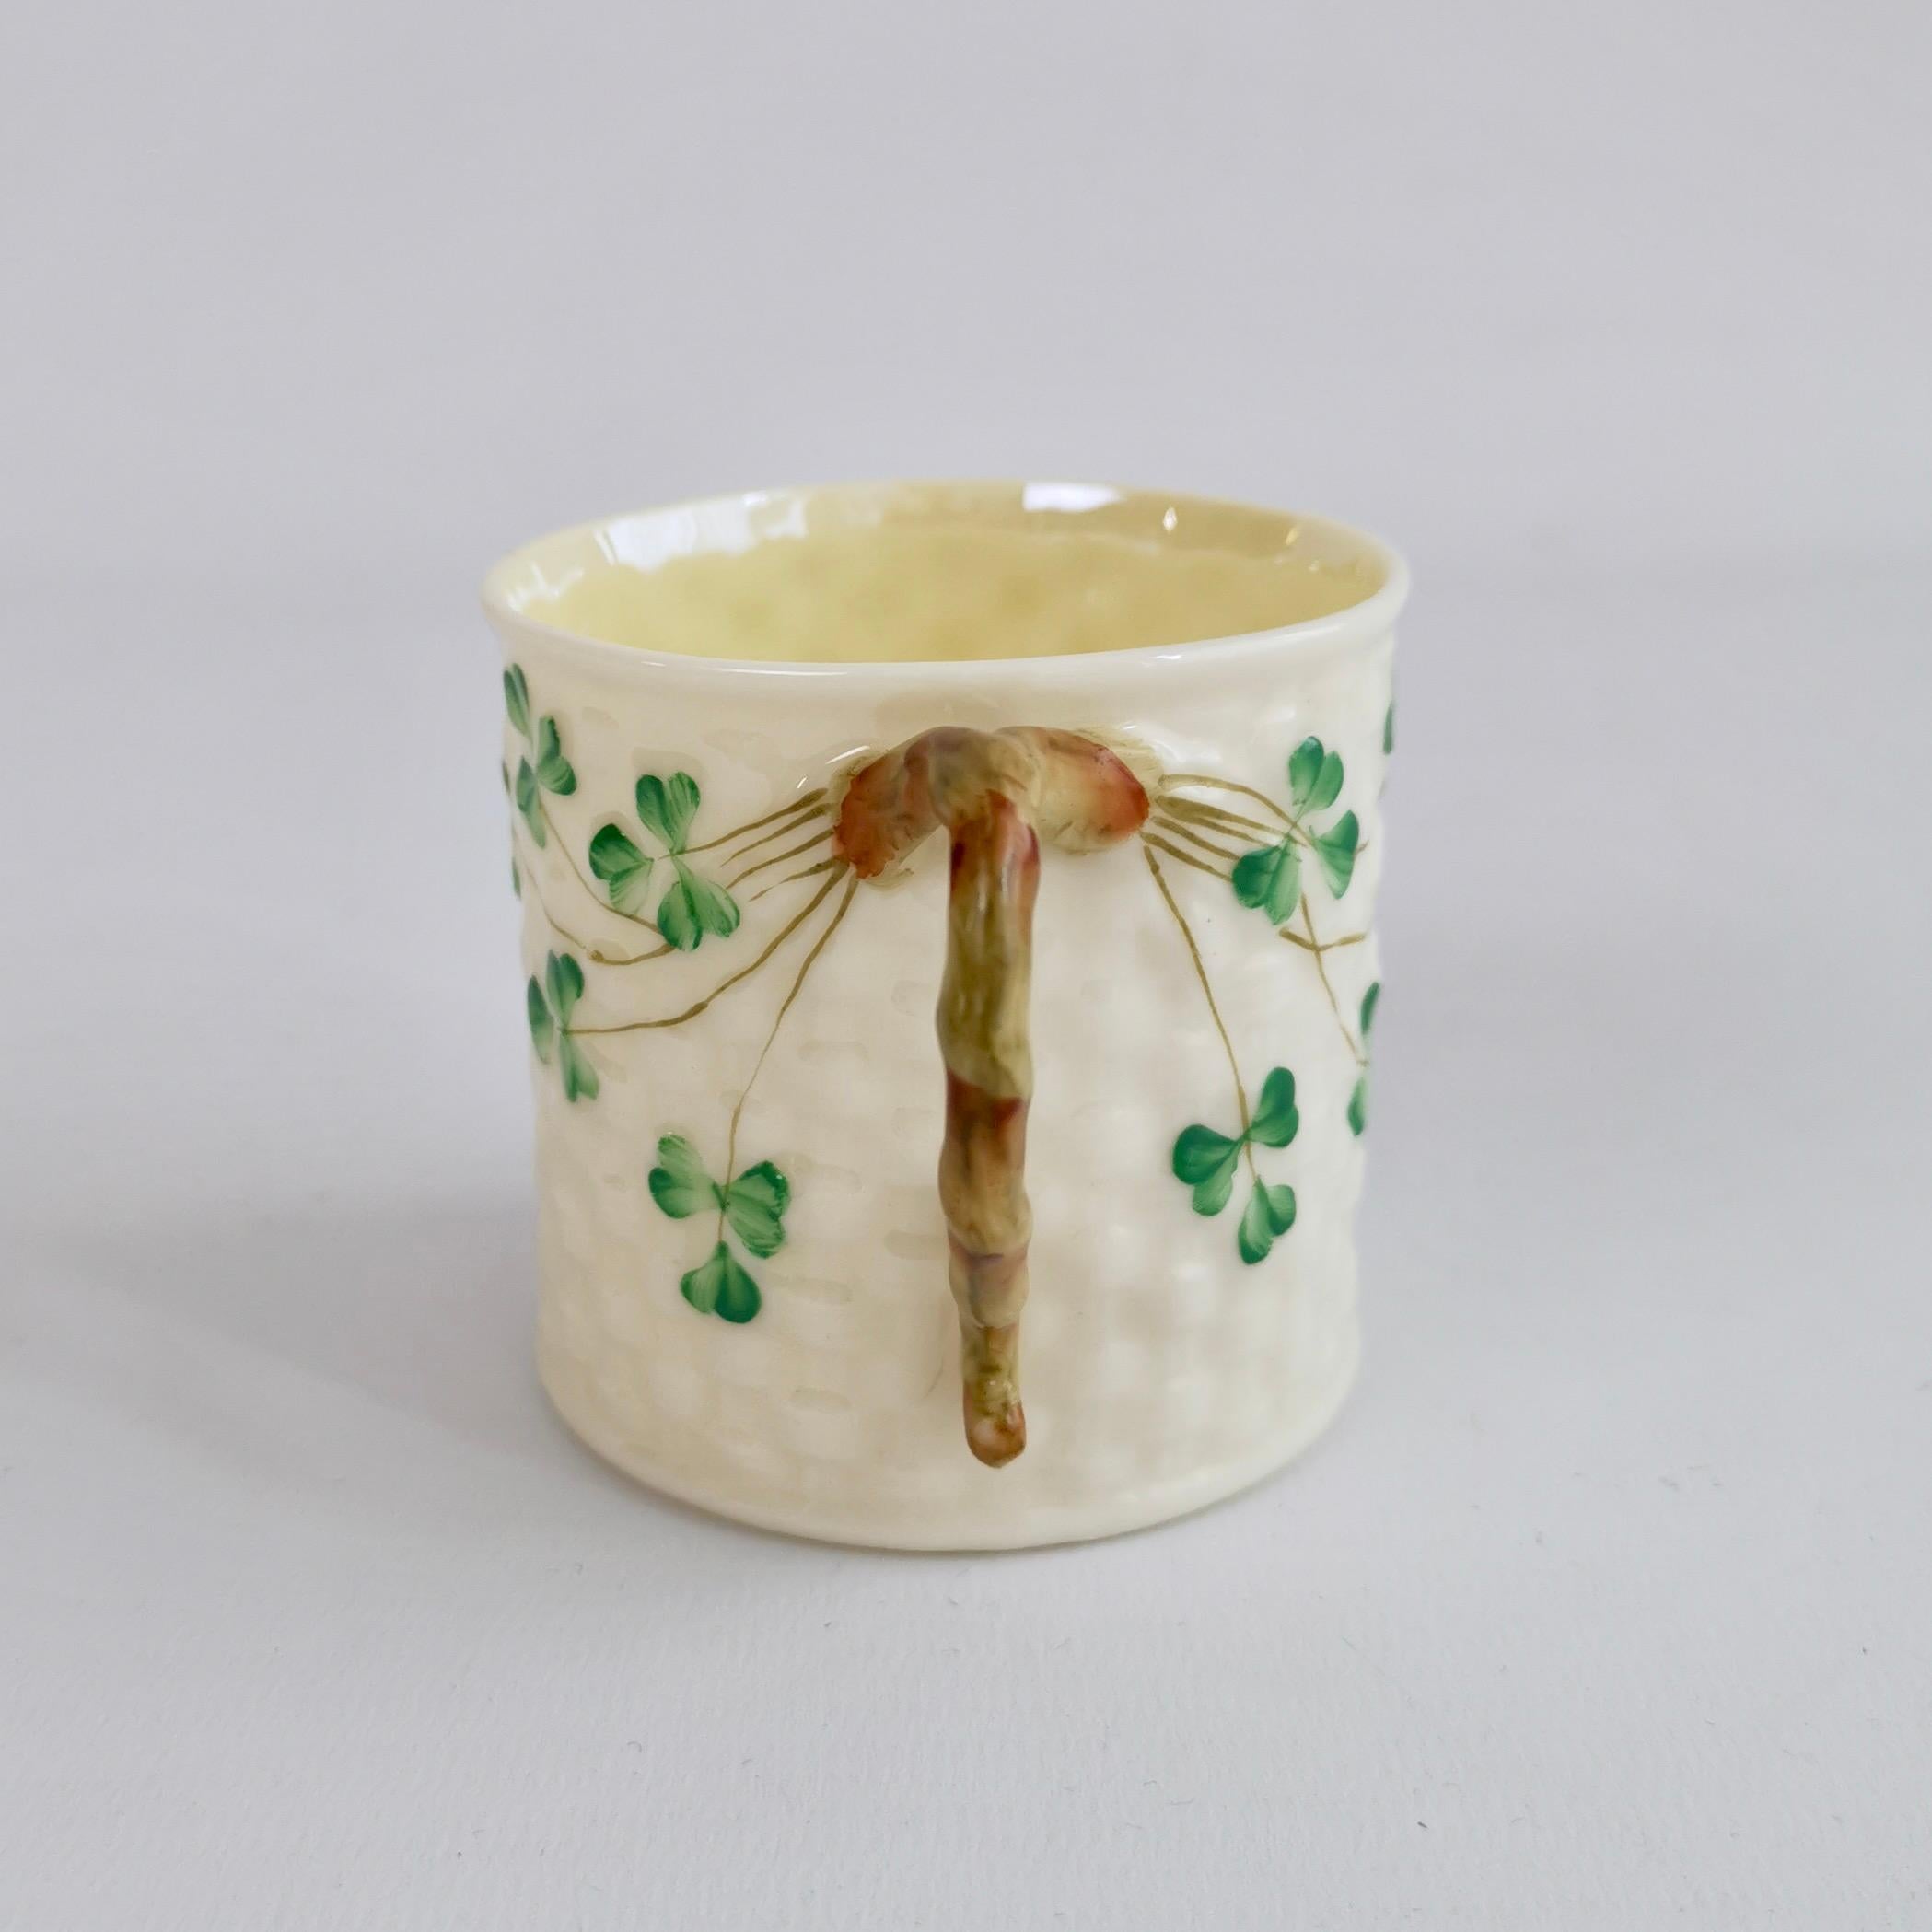 This is a very charming small mug made by Belleek in the Shamrock design. It has the 3rd Black Mark, which was used between 1926 and 1946. The mug is fine and small - it would hold about one flat white.

I have one more of these available, if